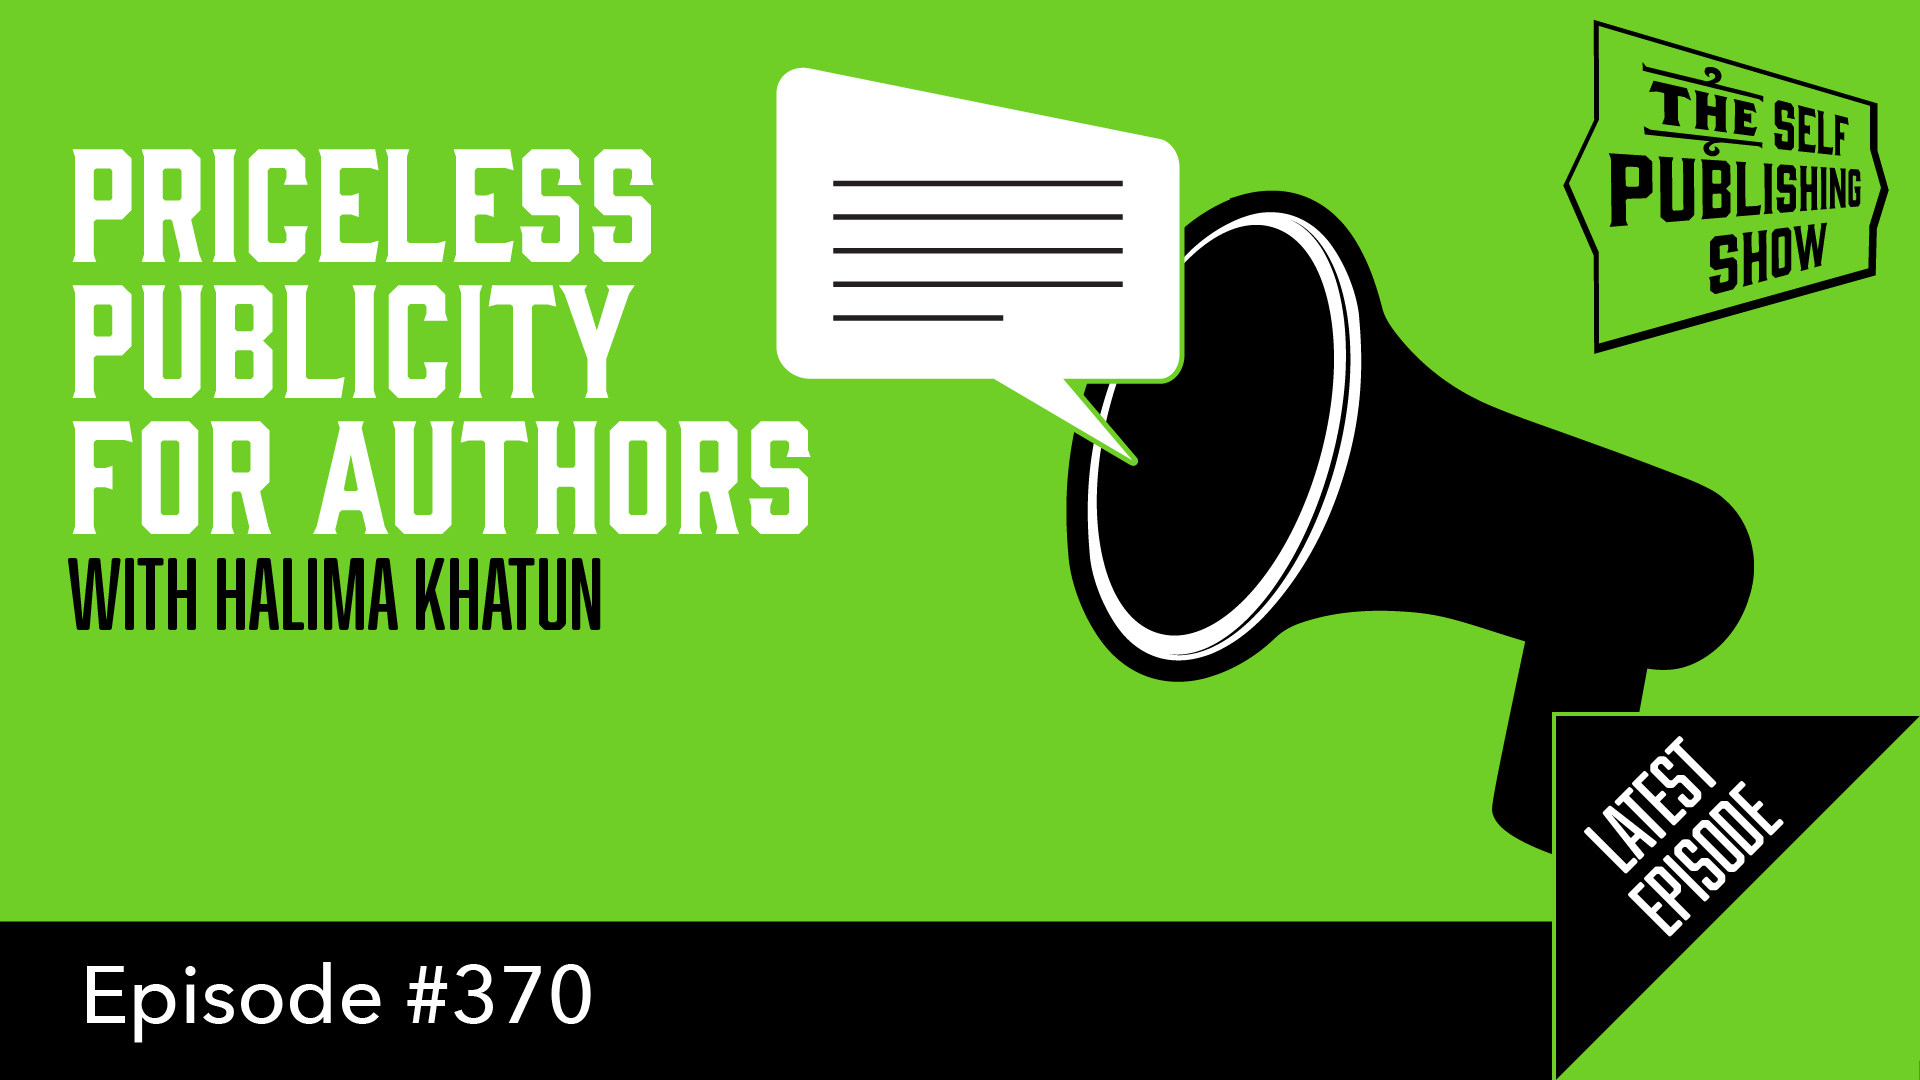 SPS-370: Priceless Publicity for Authors – with Halima Khatun